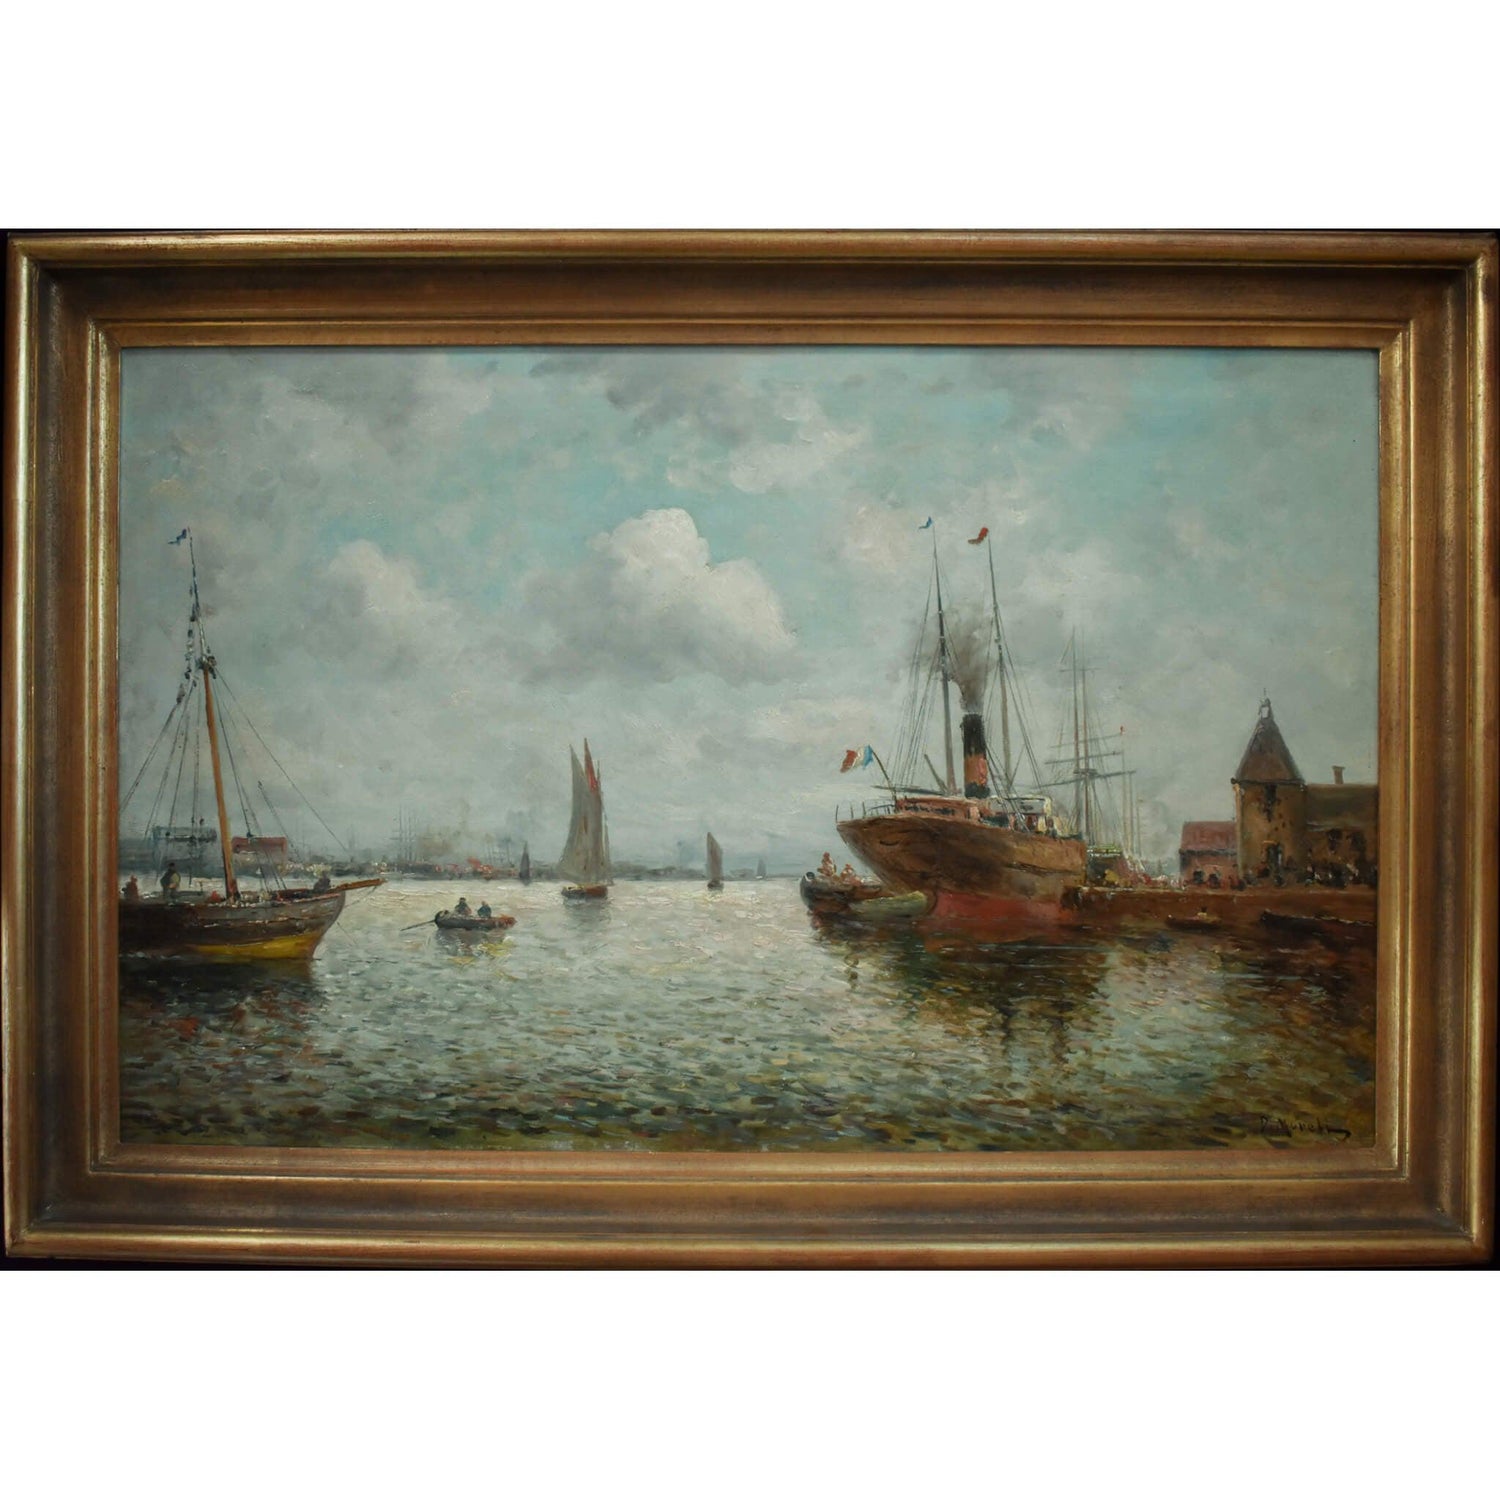 Antique seascape oil painting depicting a harbour with sailboats circa 1880 by D'Arcy Morell for sale at Winckelmann Gallery